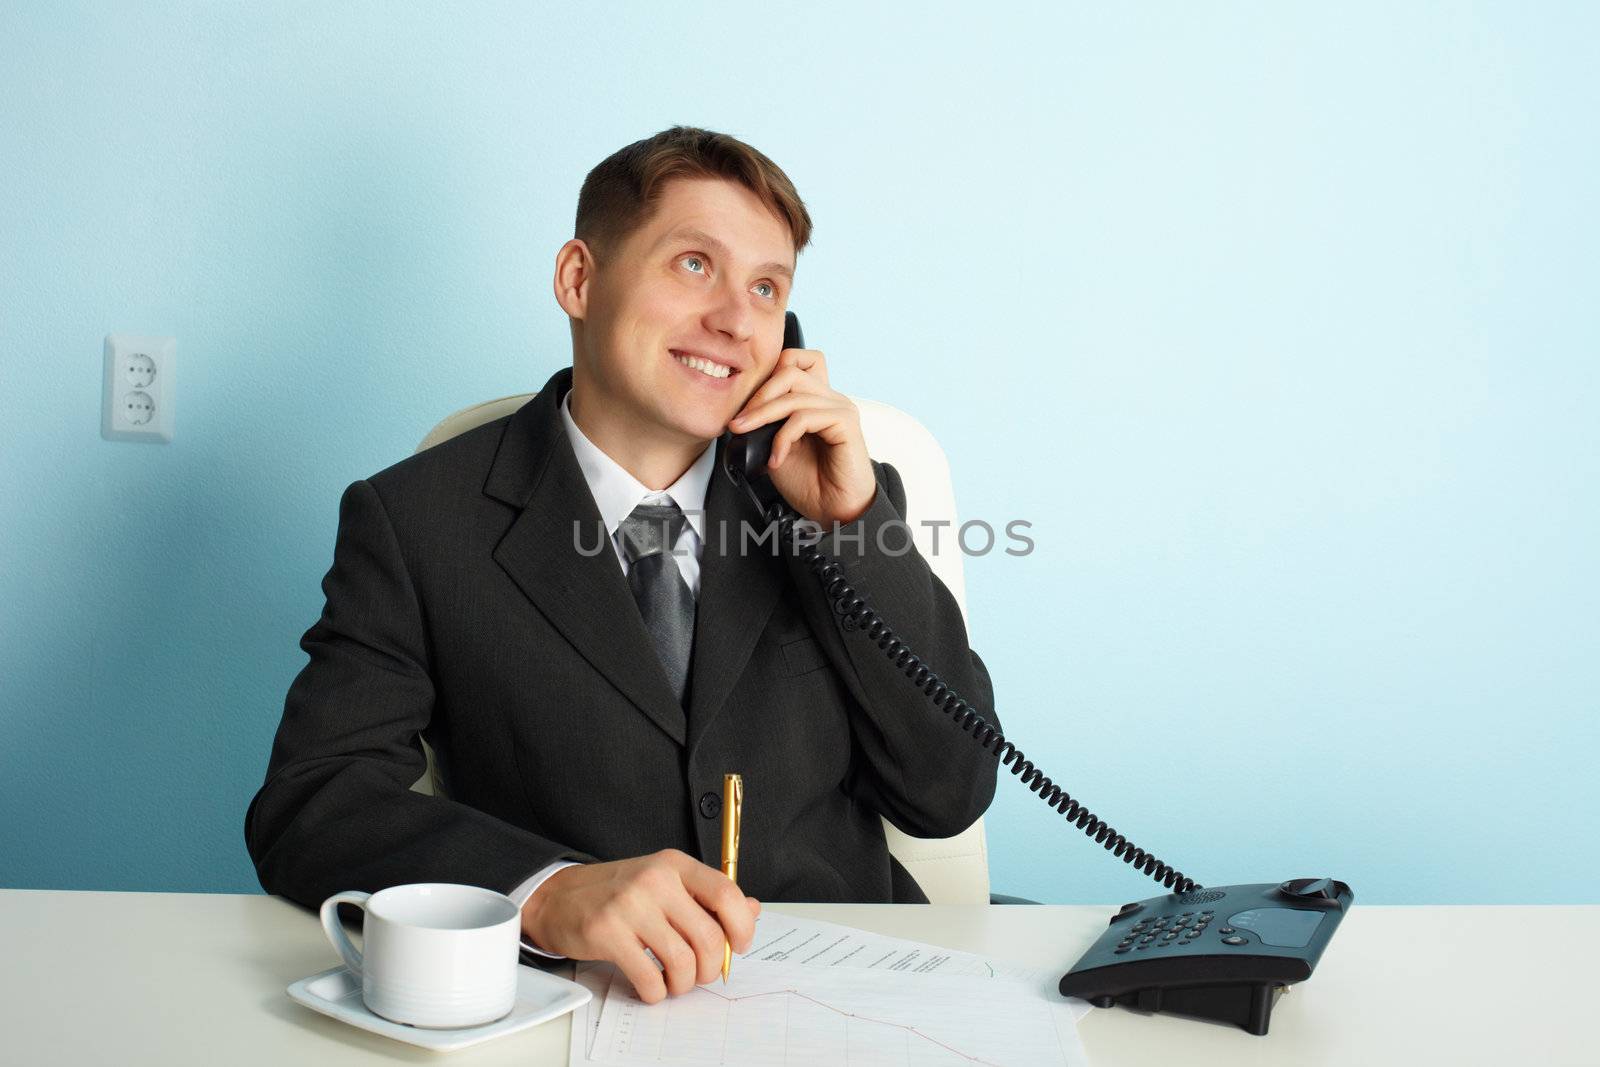 Business man talking on the phone in the office